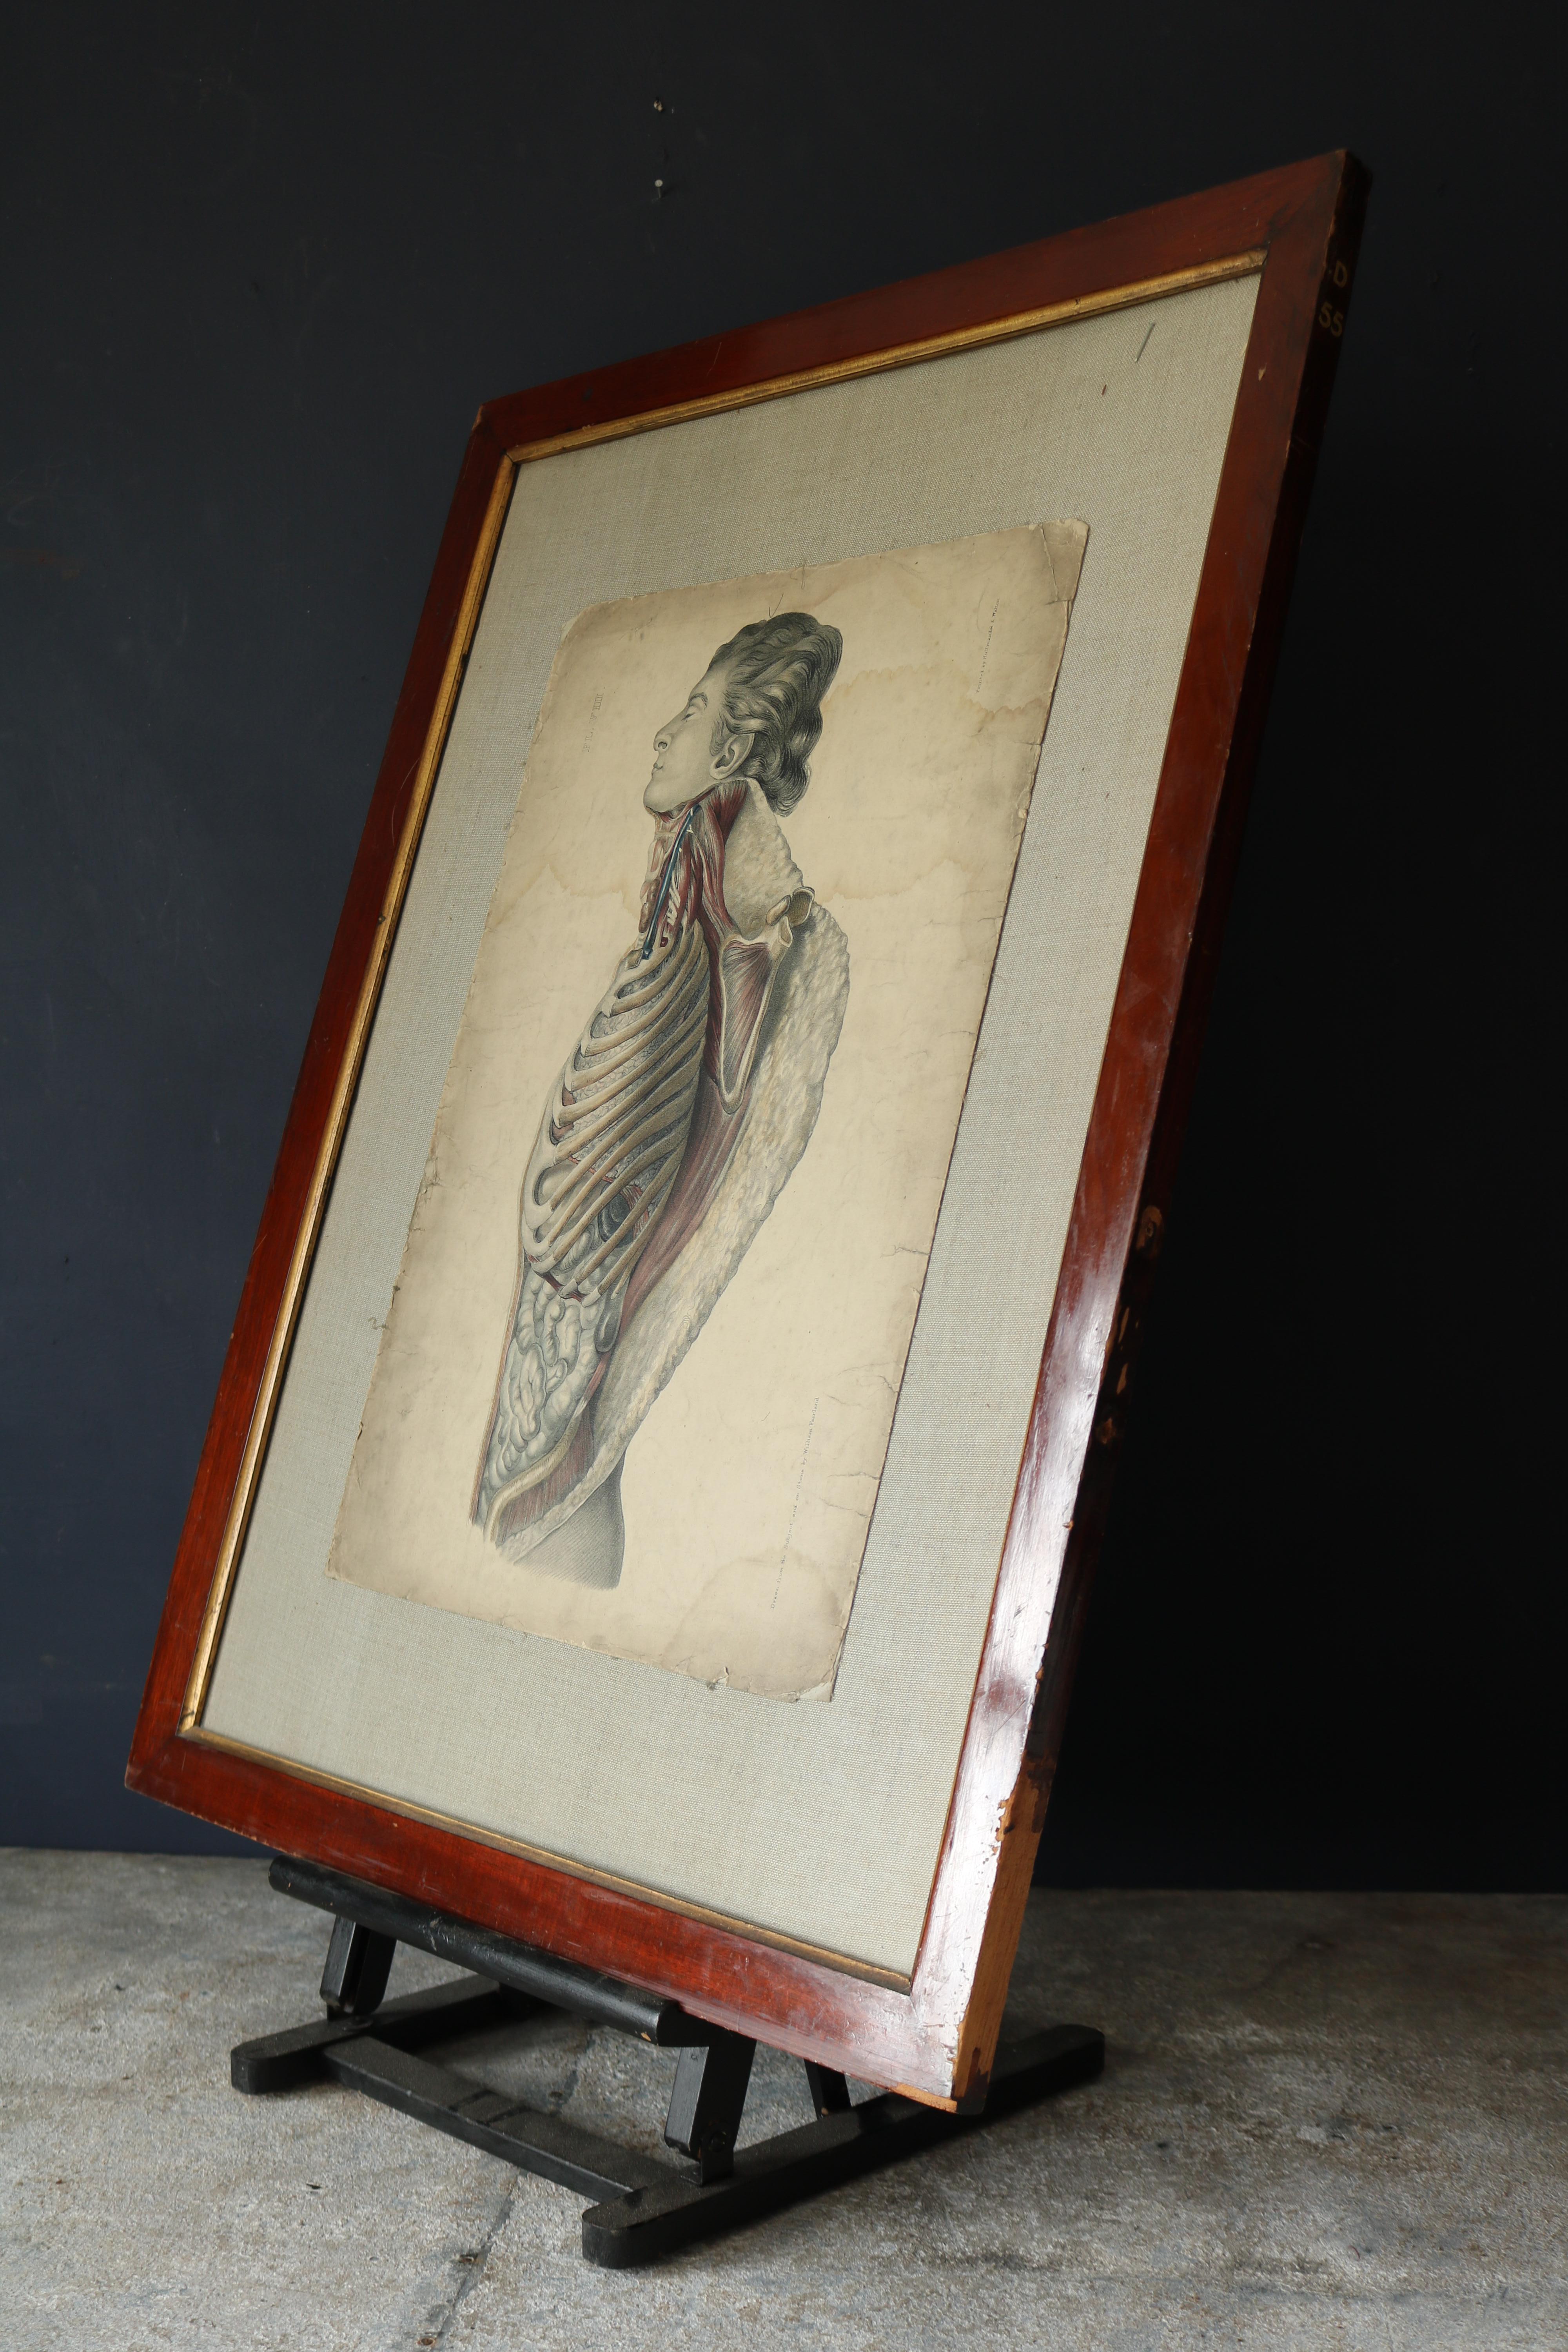 English 19th Century Hand Colored Lithograph by William Fairland